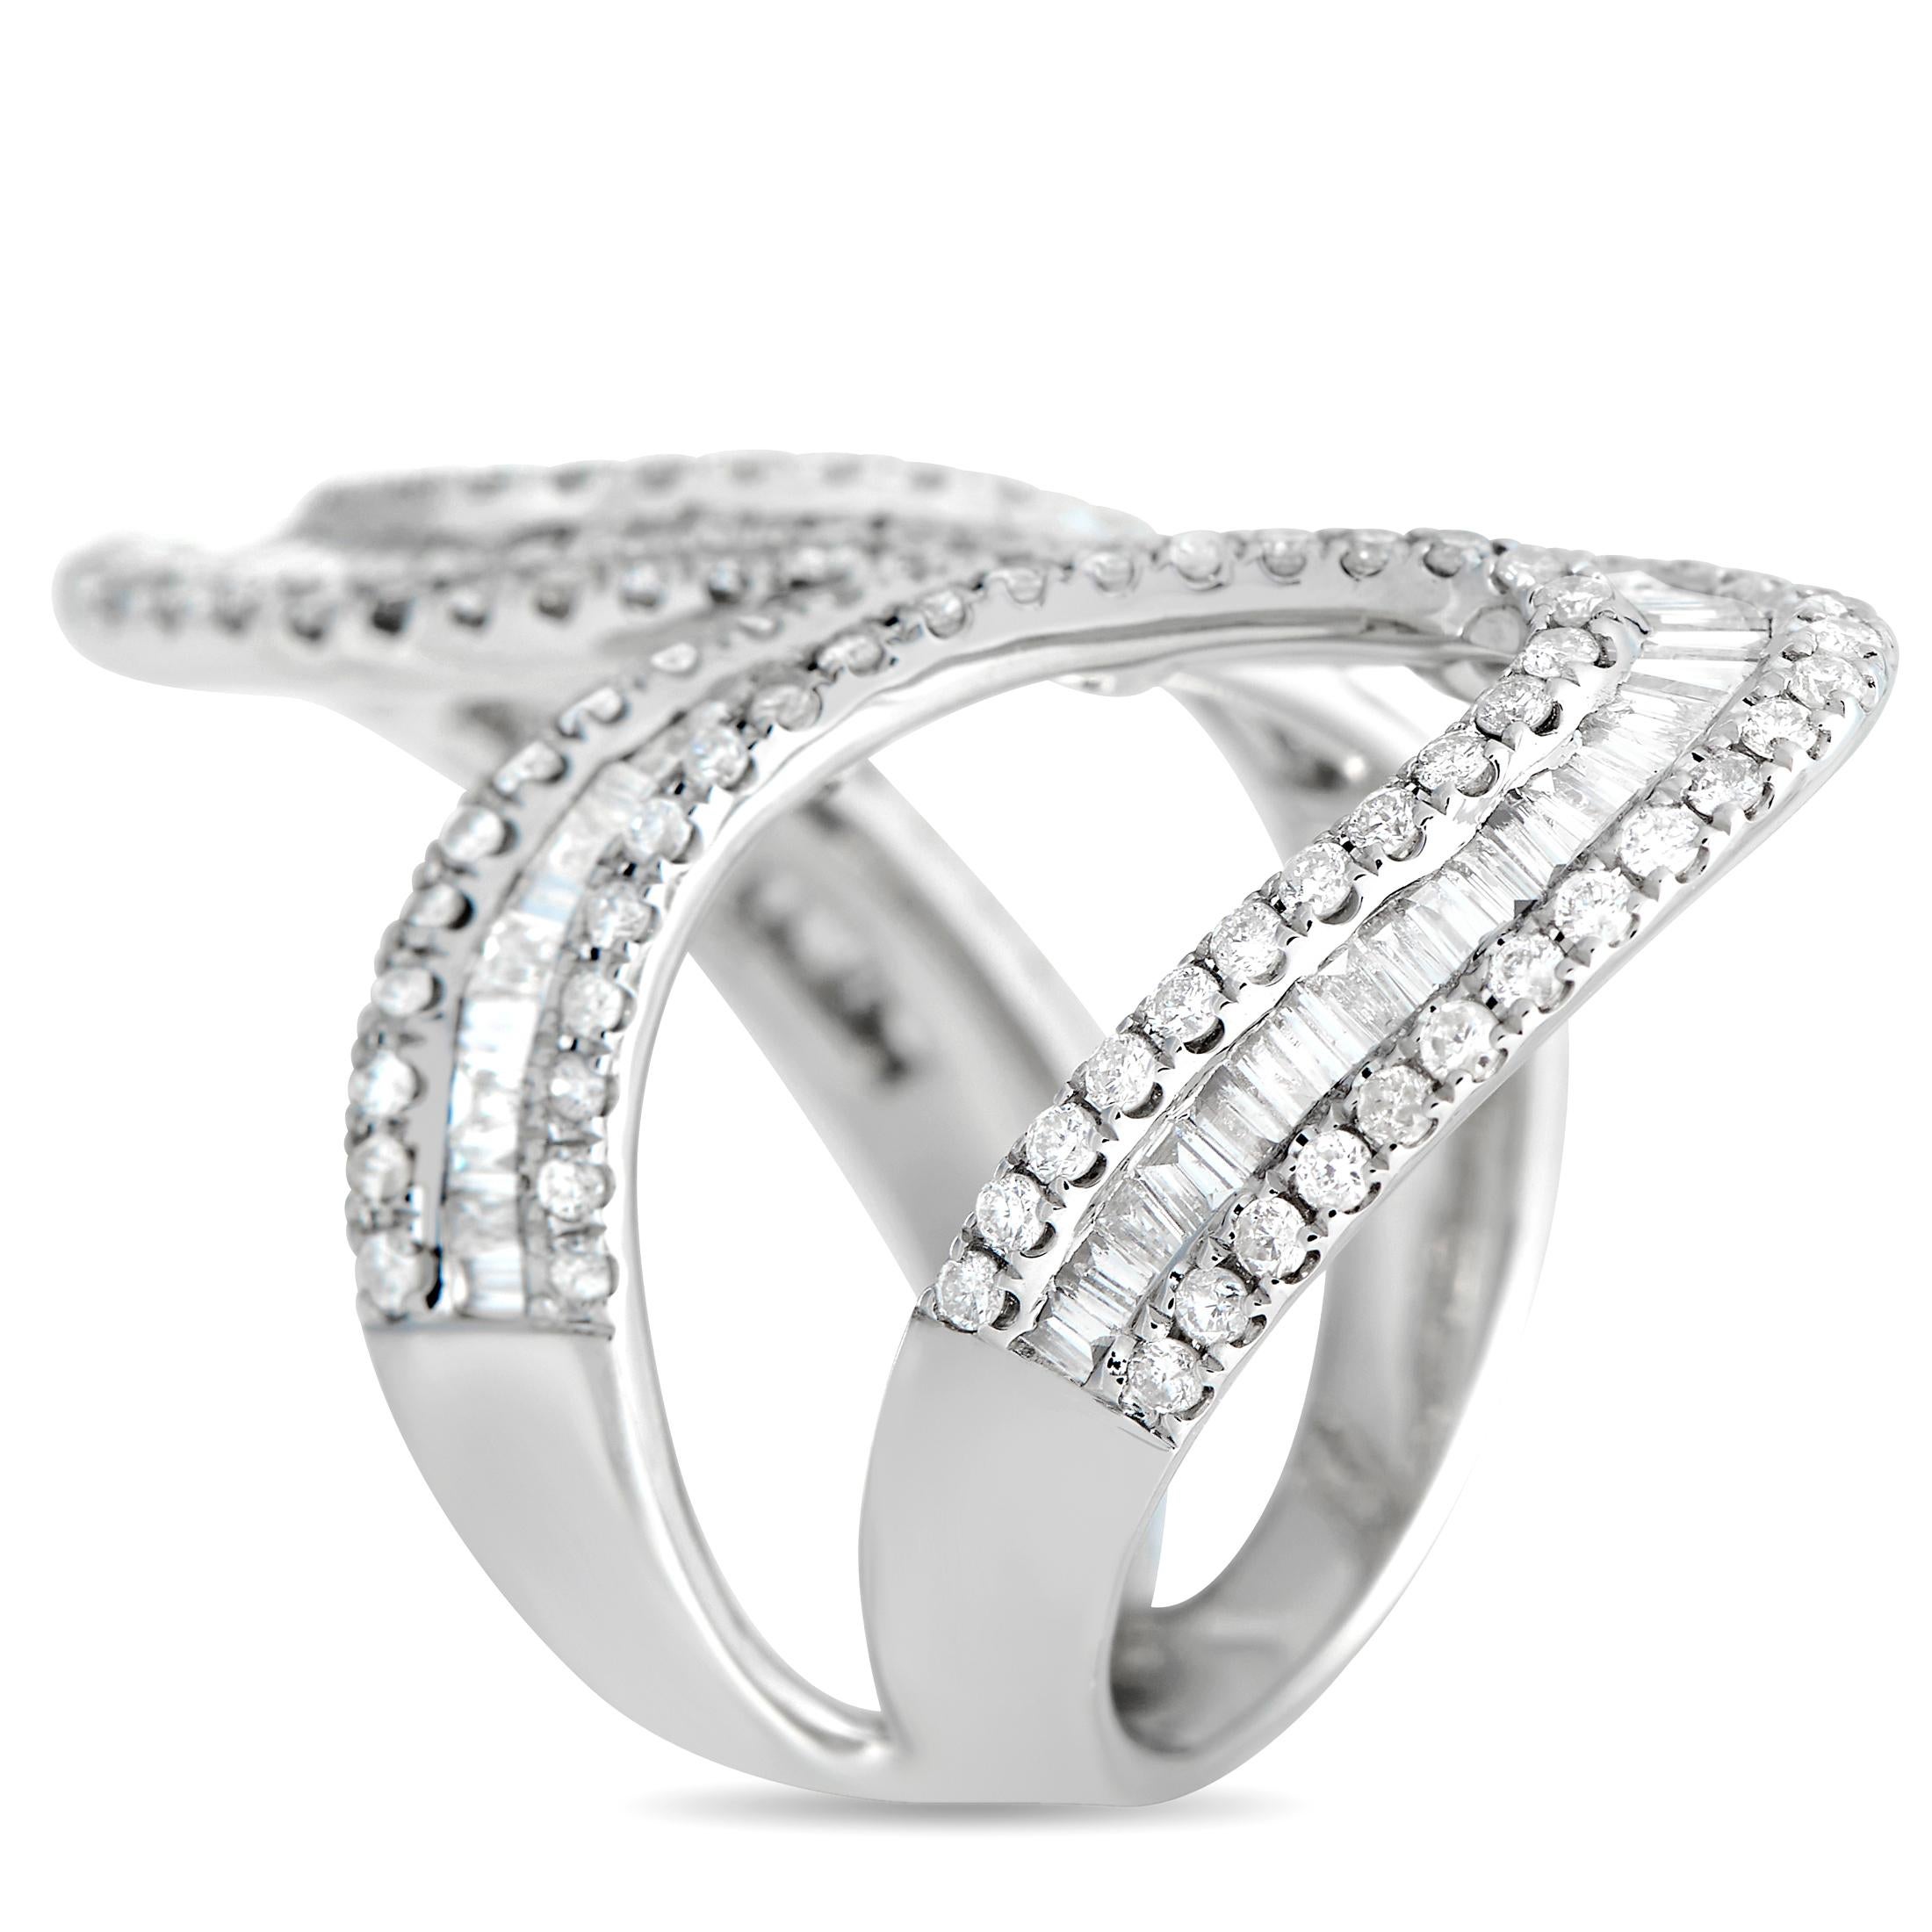 Diamonds with a total weight of 3.0 carats allow this luxury ring to effortlessly emanate light. This piece\u2019s dynamic 14K White Gold setting features an 8mm wide band and a top height measuring 2mm.\r\nThis jewelry piece is offered in new